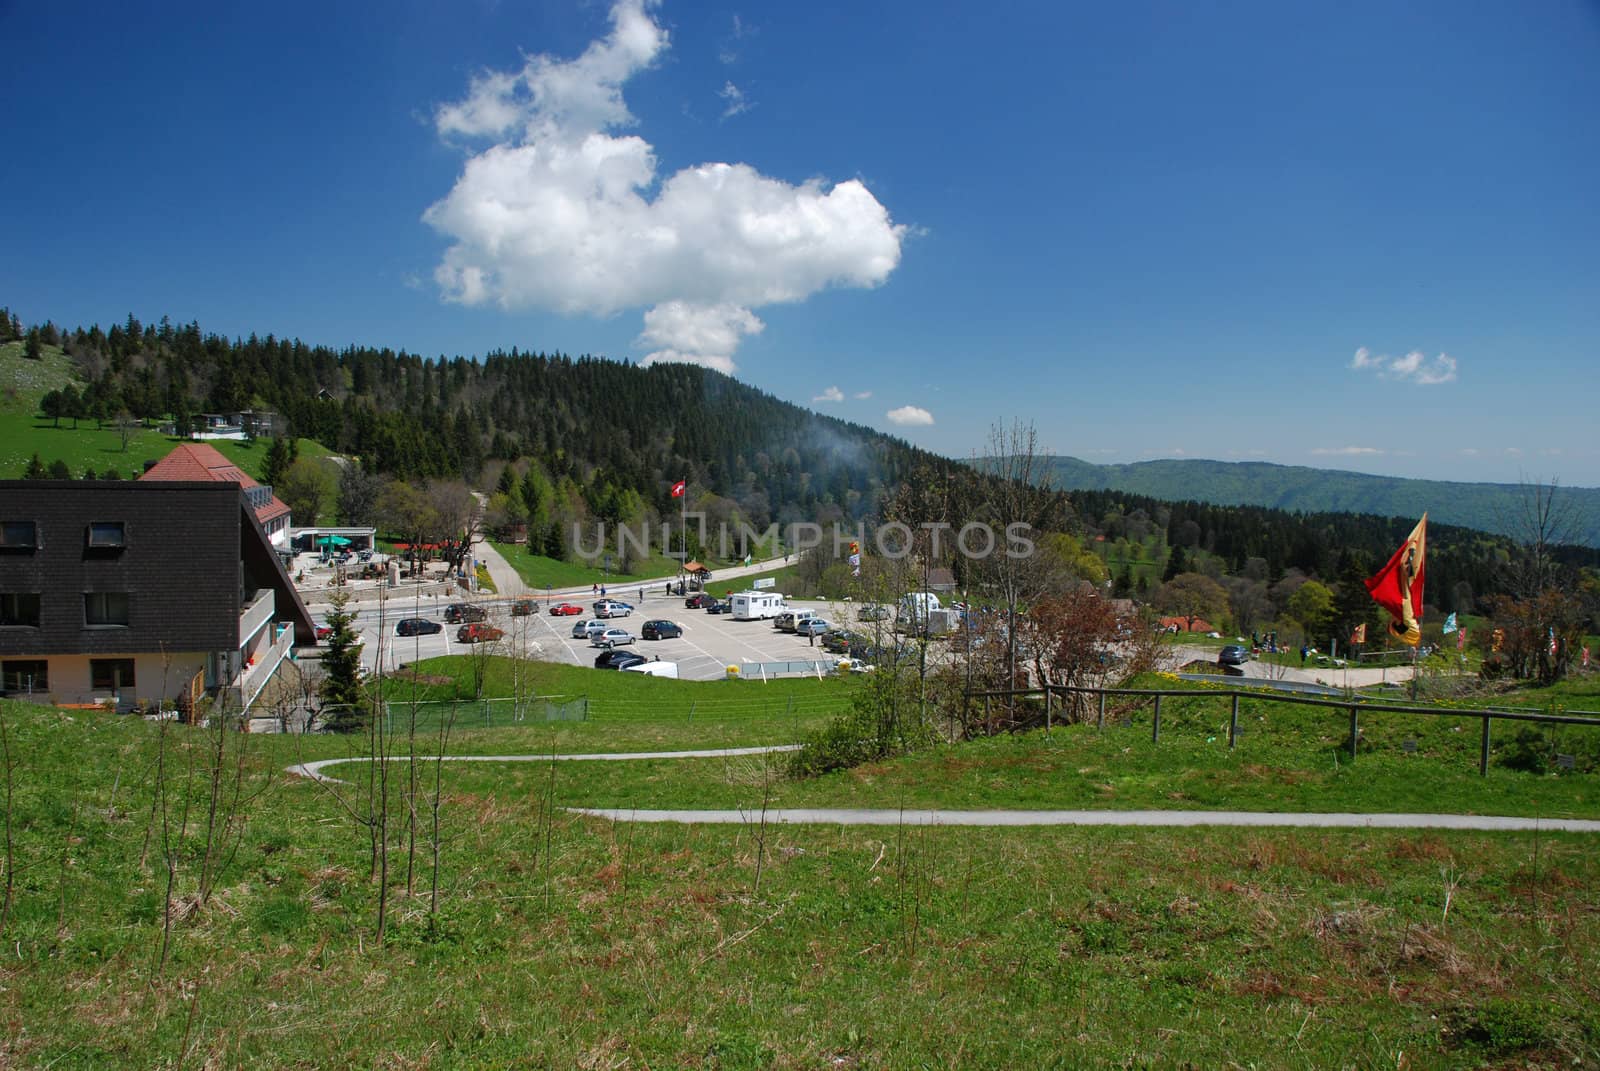 General picture of "Vue des Alpas" in Switzerland Jura with hotels, parking place, point of veu wrom were we can observe Alps, and wood and the sky at the background